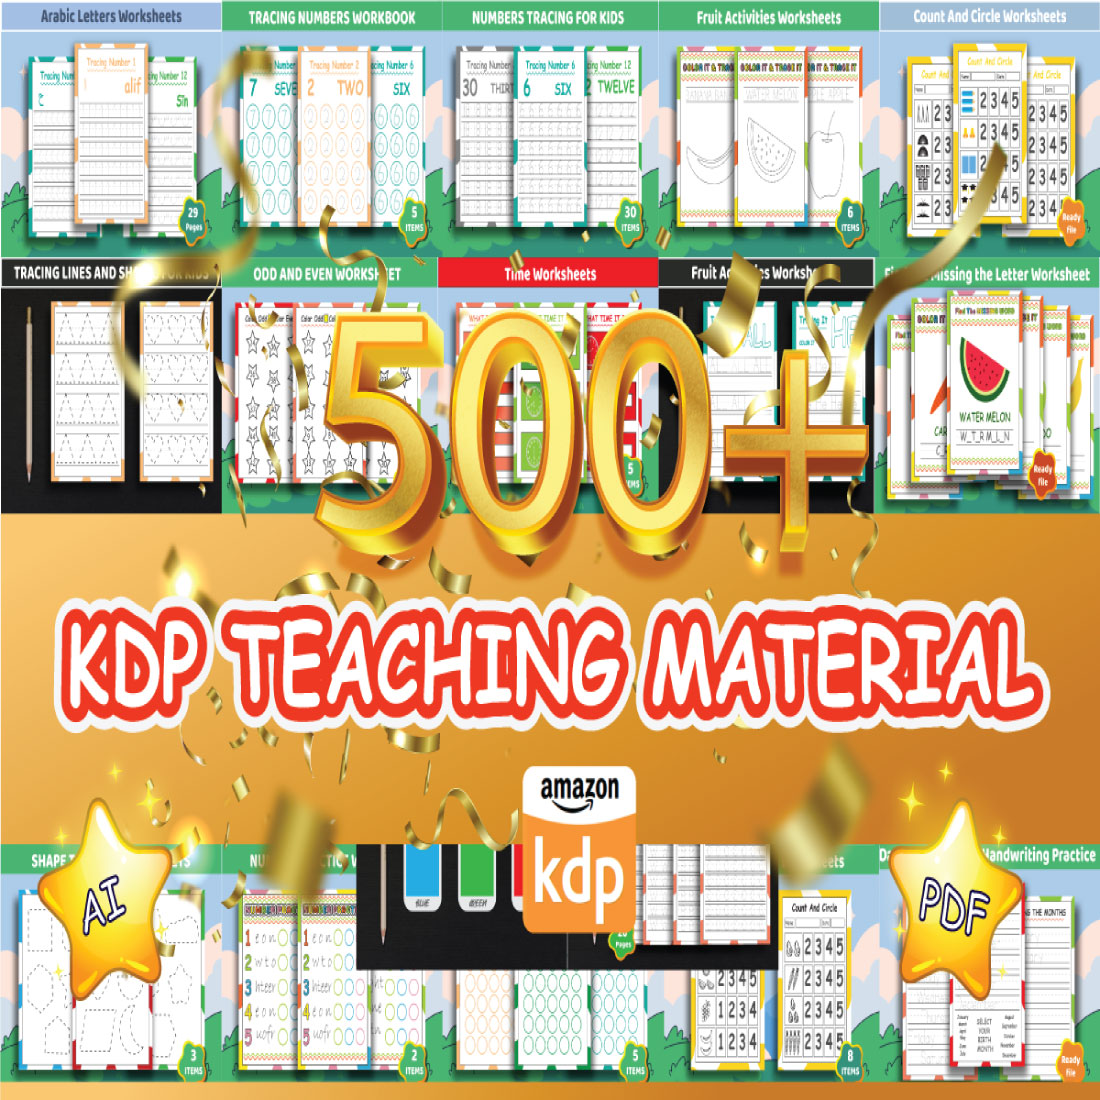 Teaching Materials Bundle cover image.